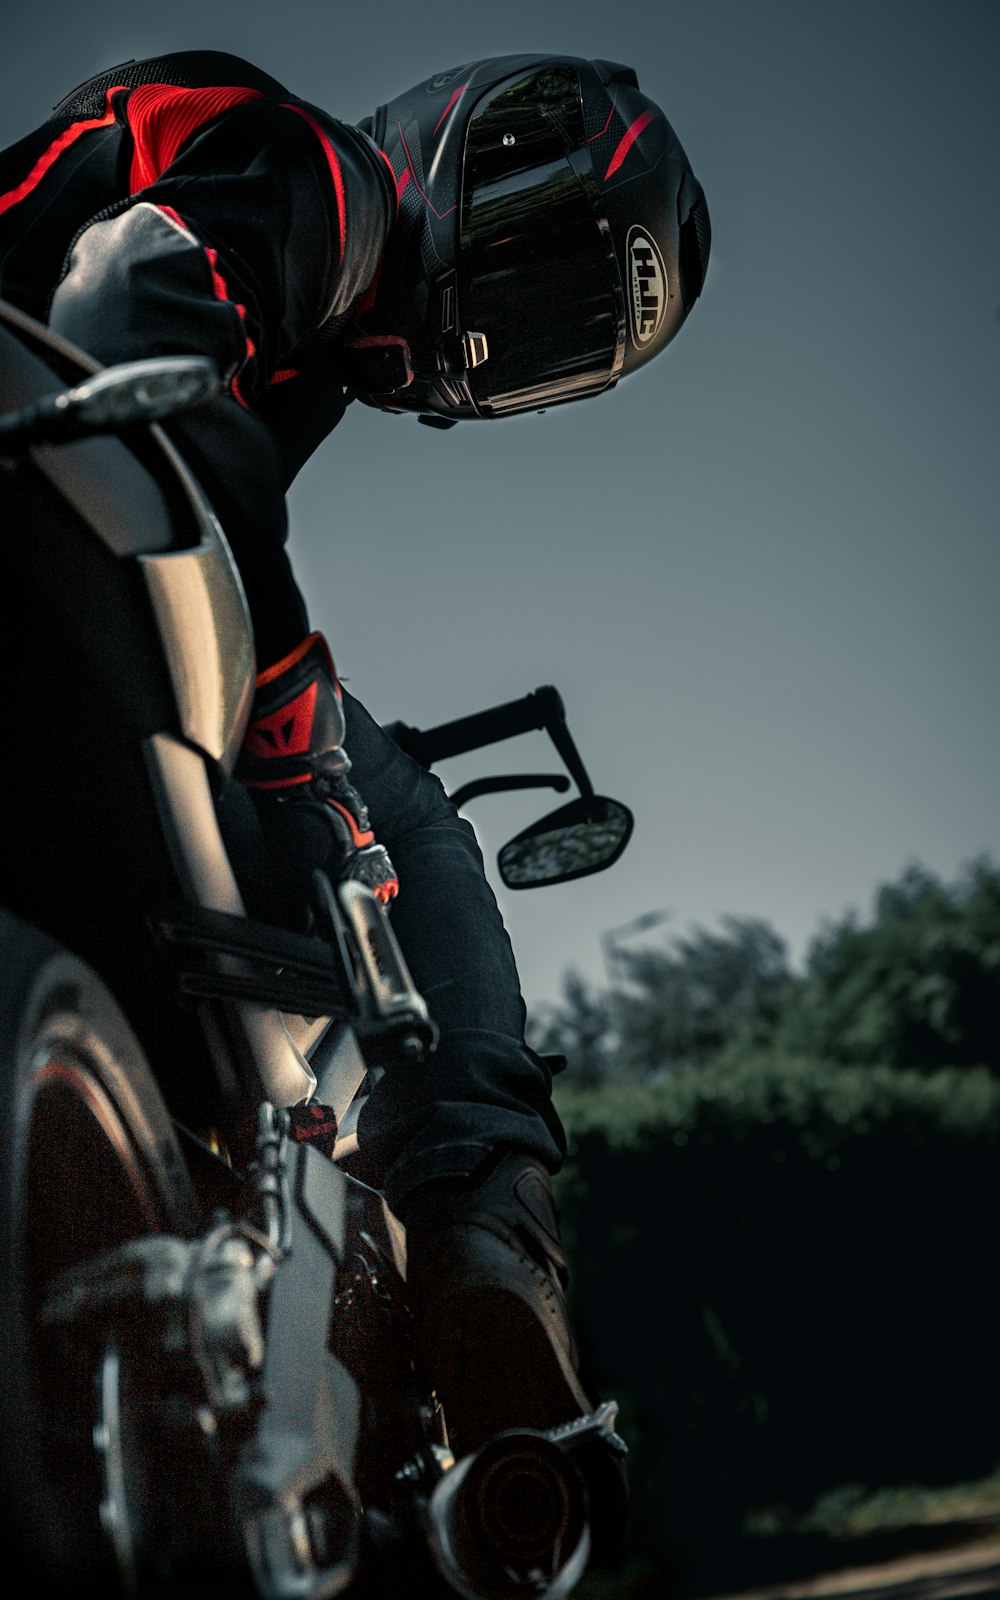 500+ Moto Pictures [HD] | Download Free Images on Unsplash